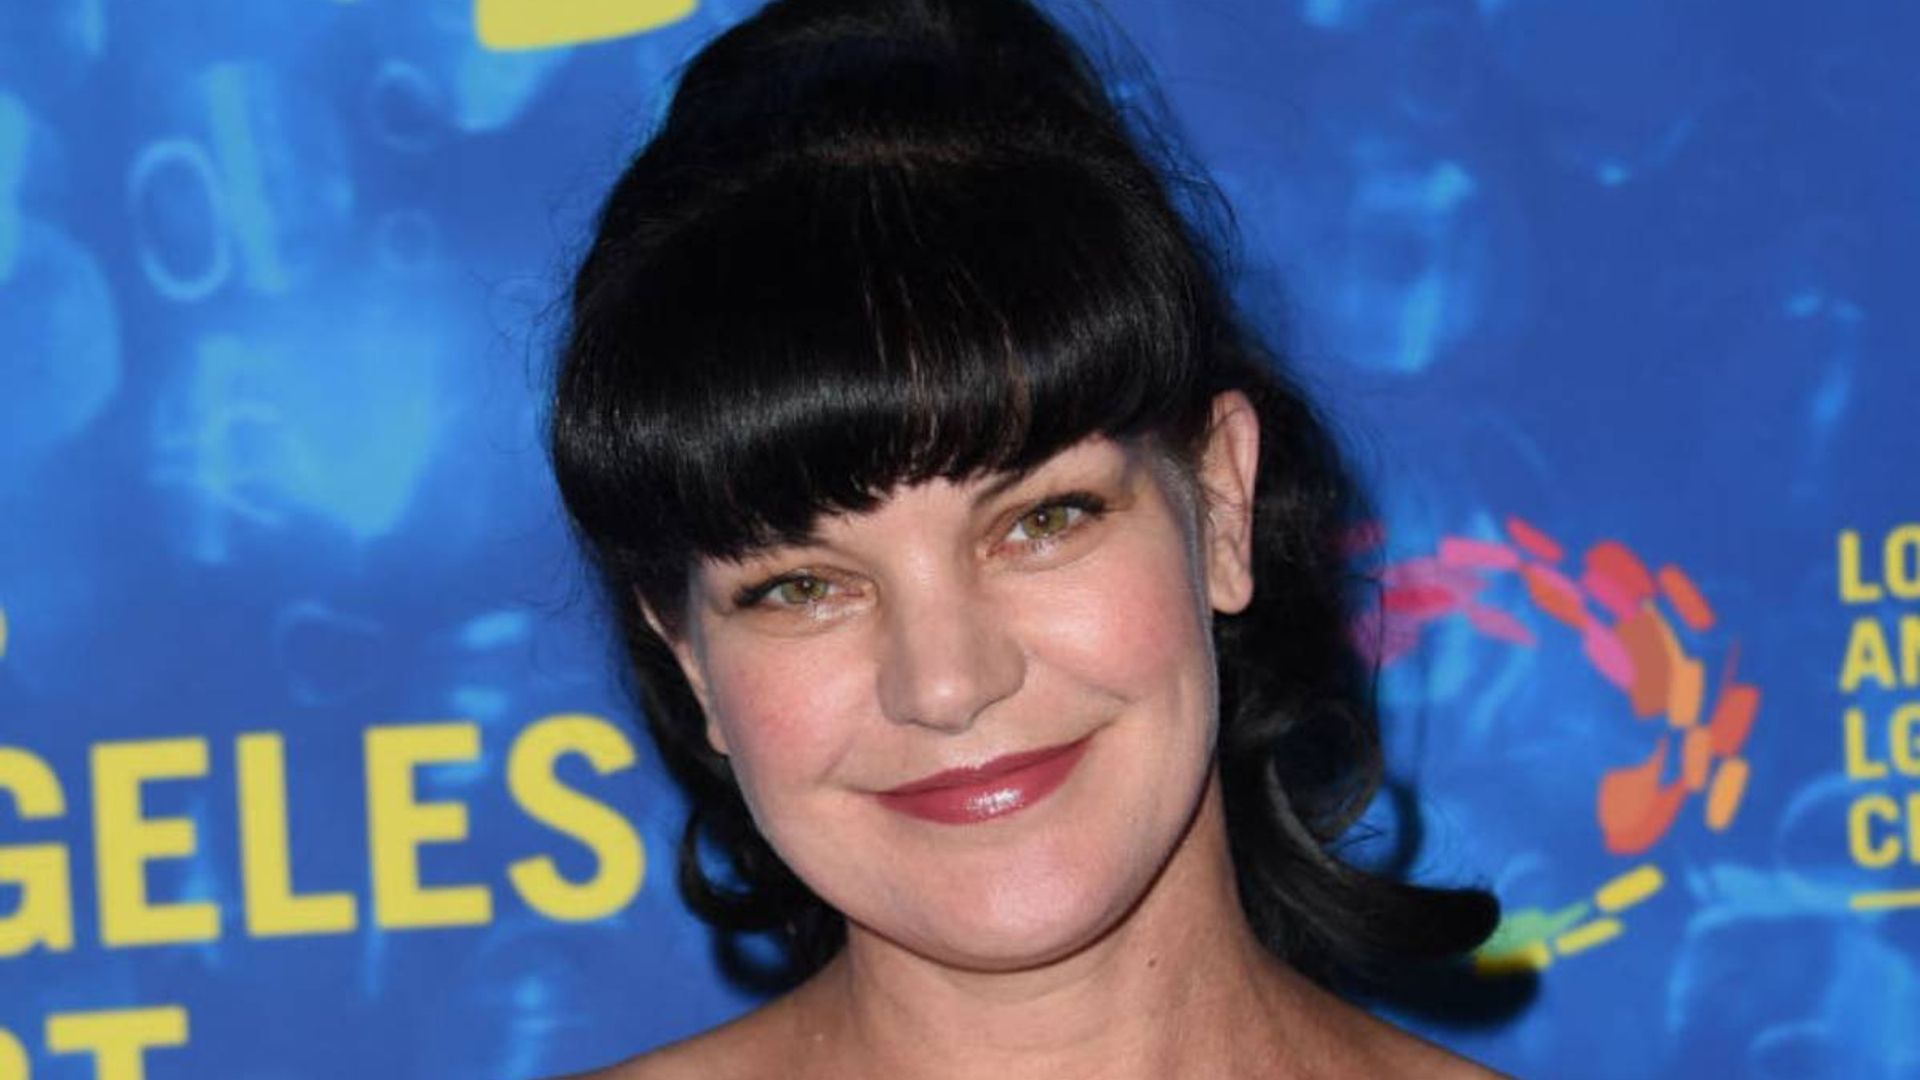 Ncis Pauley Perrette Looks So Different After Dramatic Hair Transformation Fans Go Wild Hello